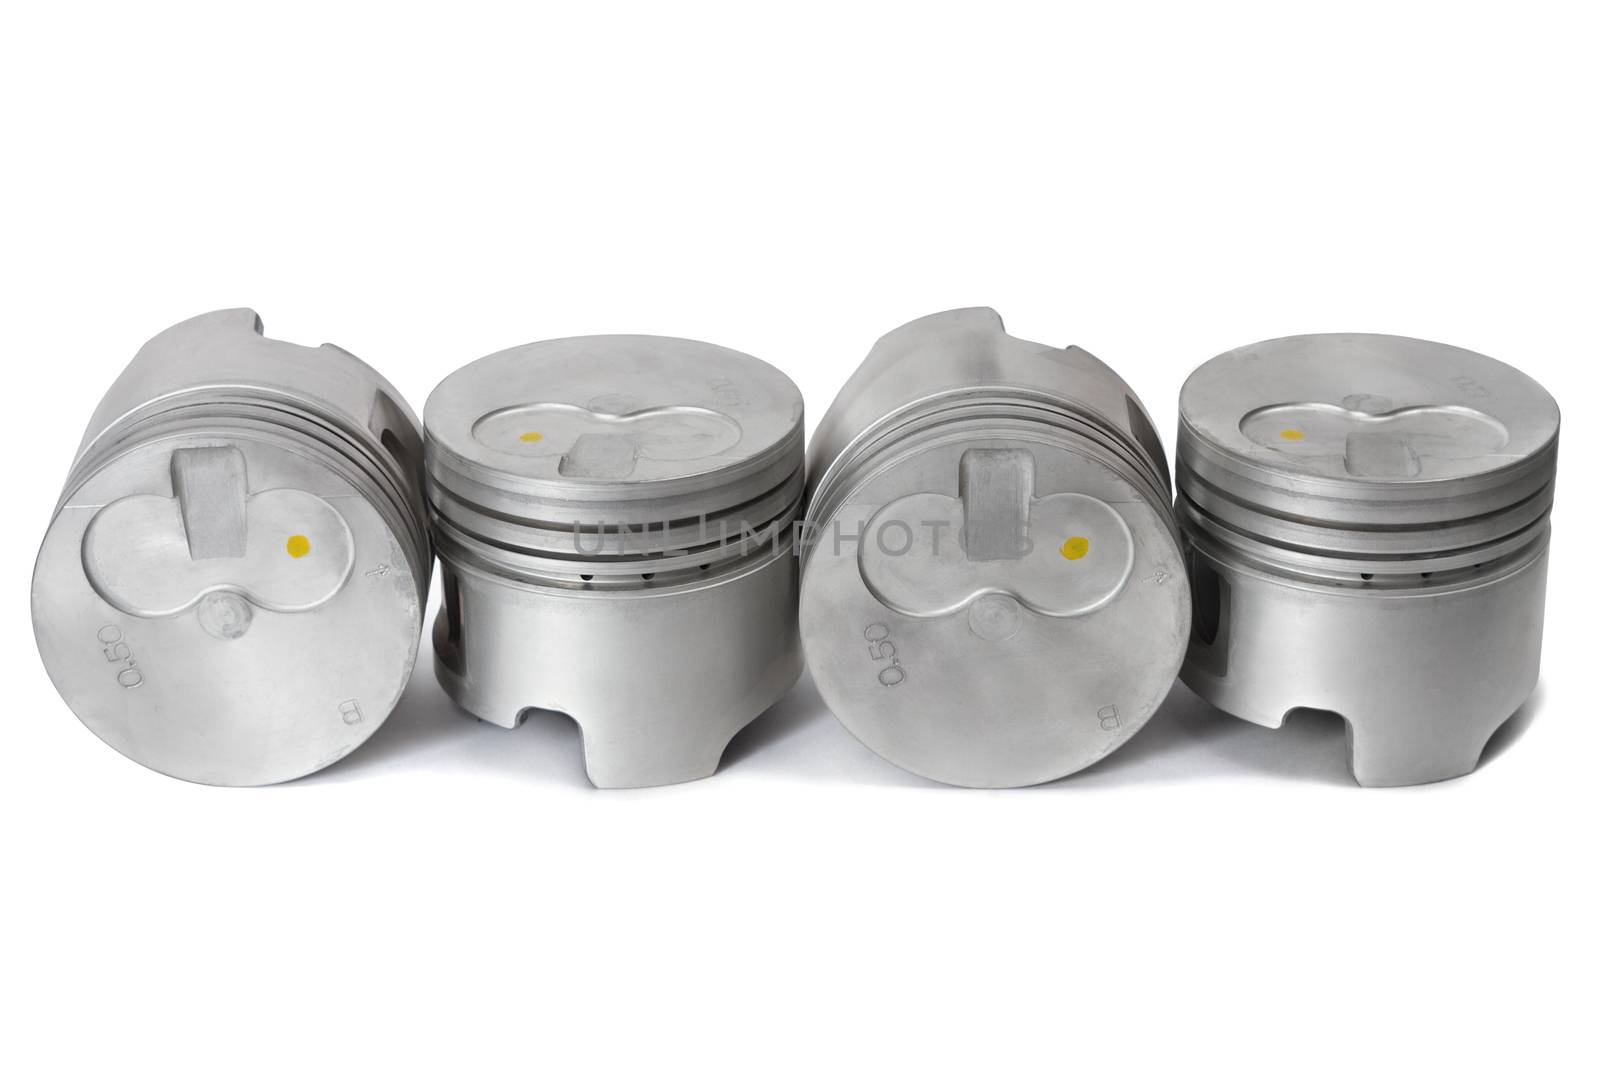 Pistons for diesel engine isolated on white background